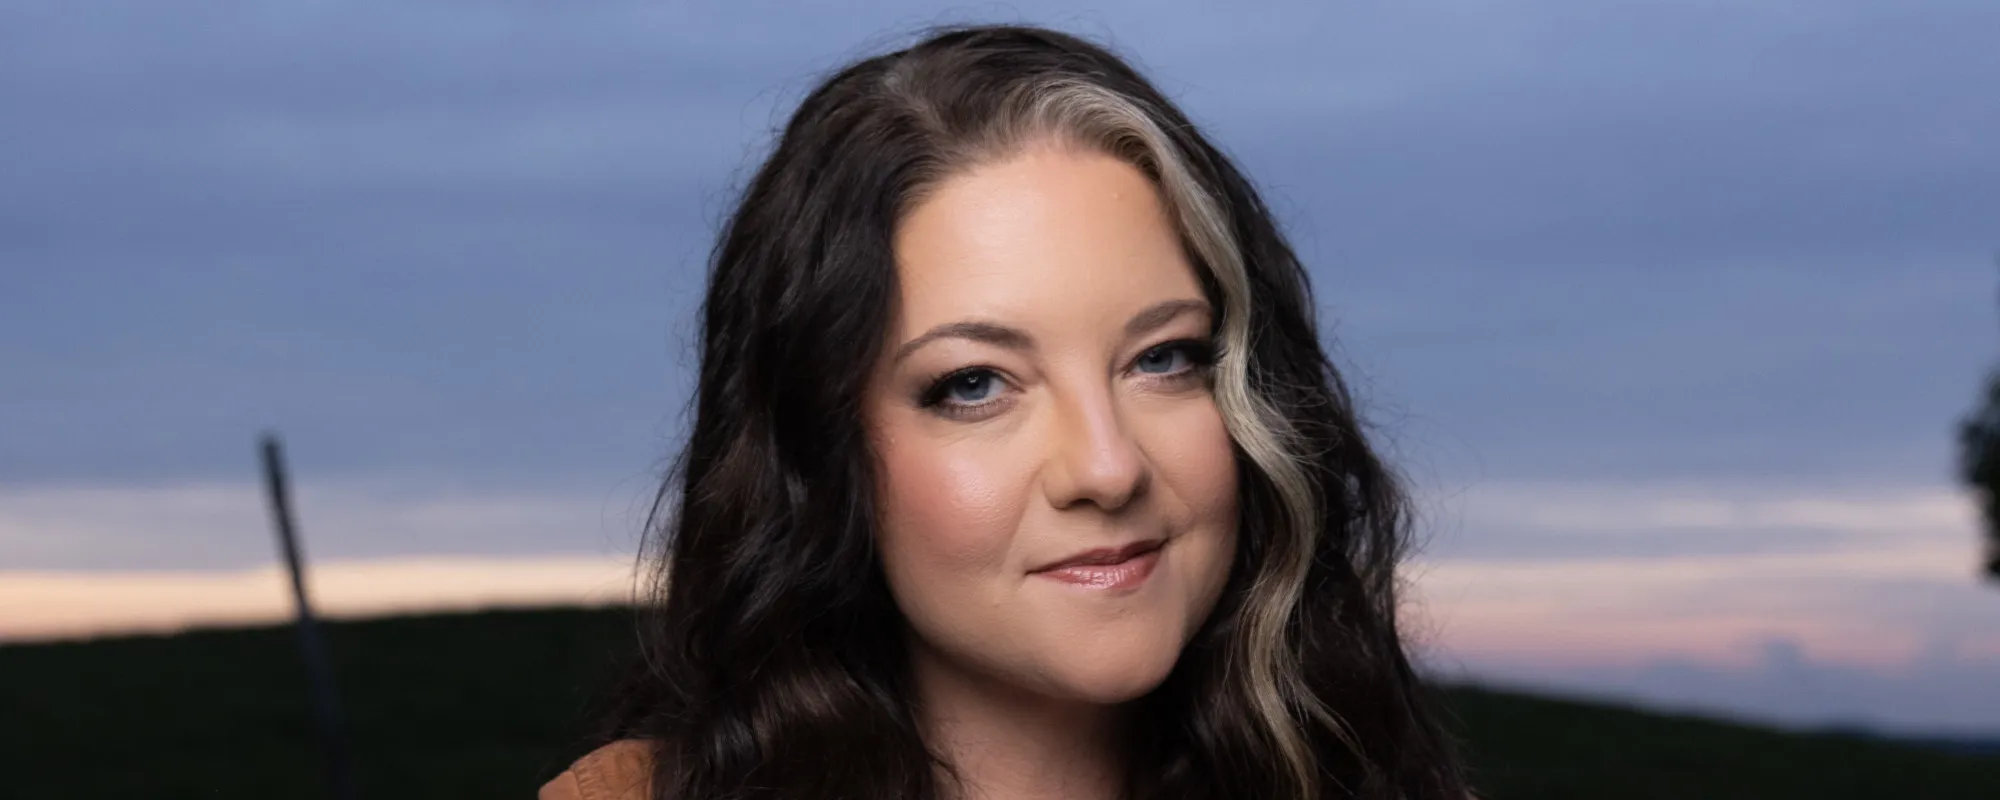 Top 10 Songs by Ashley McBryde